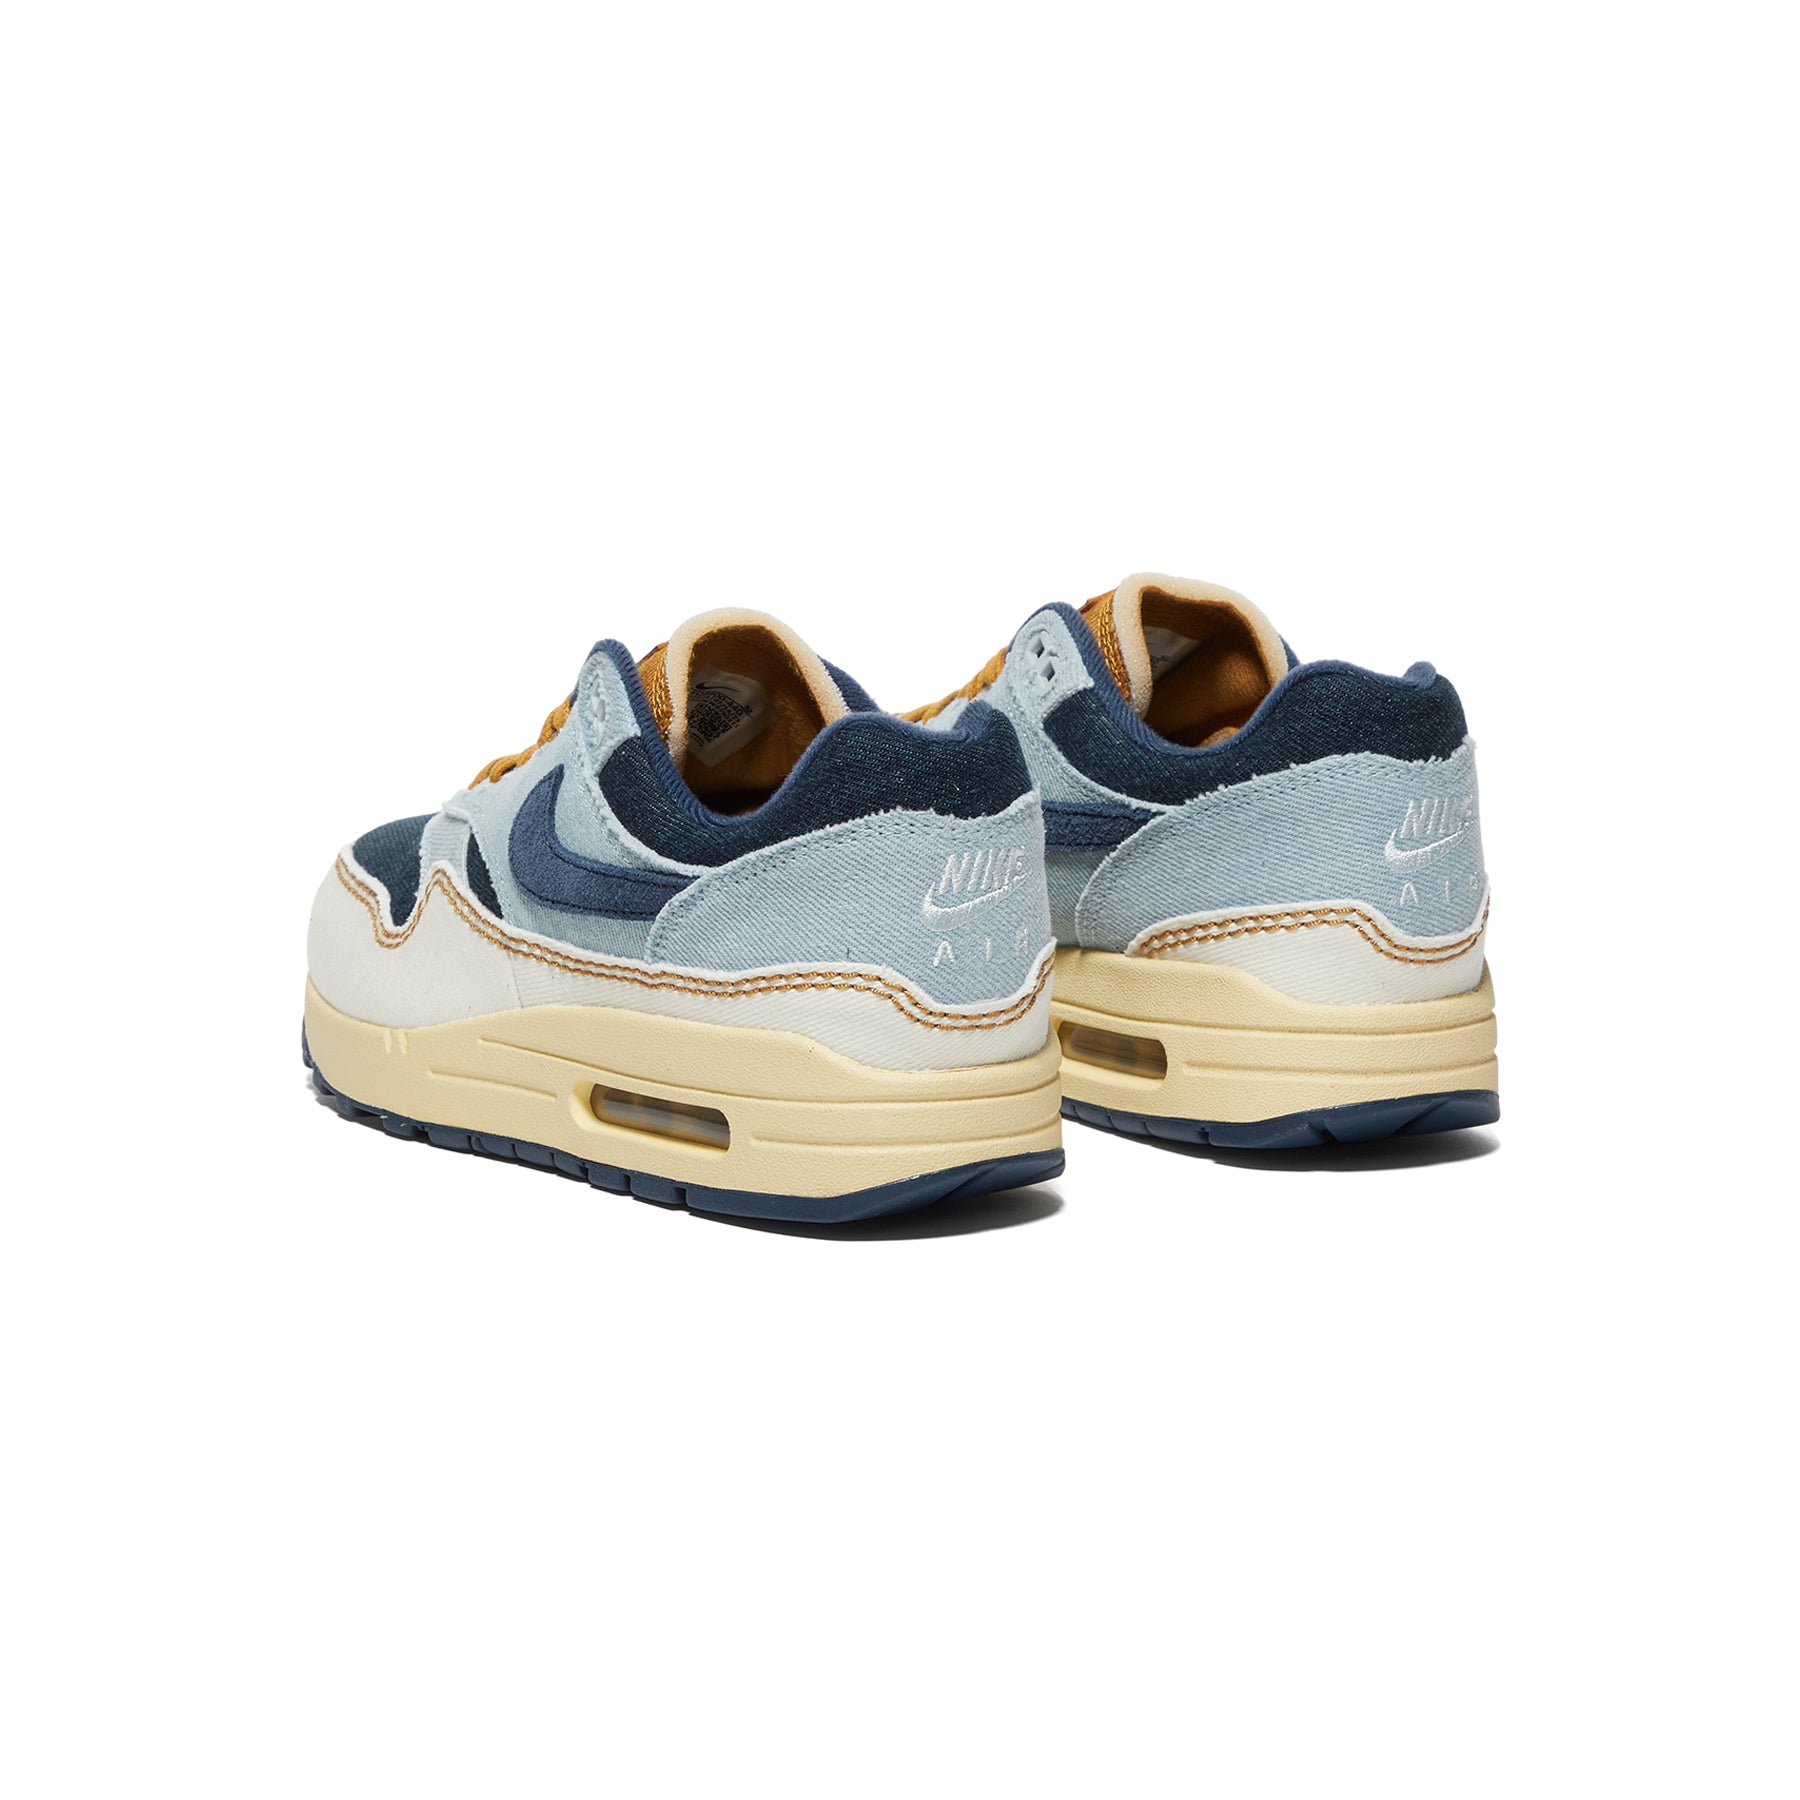 Nike Womens Air Max – (Aura/Midnight Ivory) Navy/Pale \'87 Concepts 1